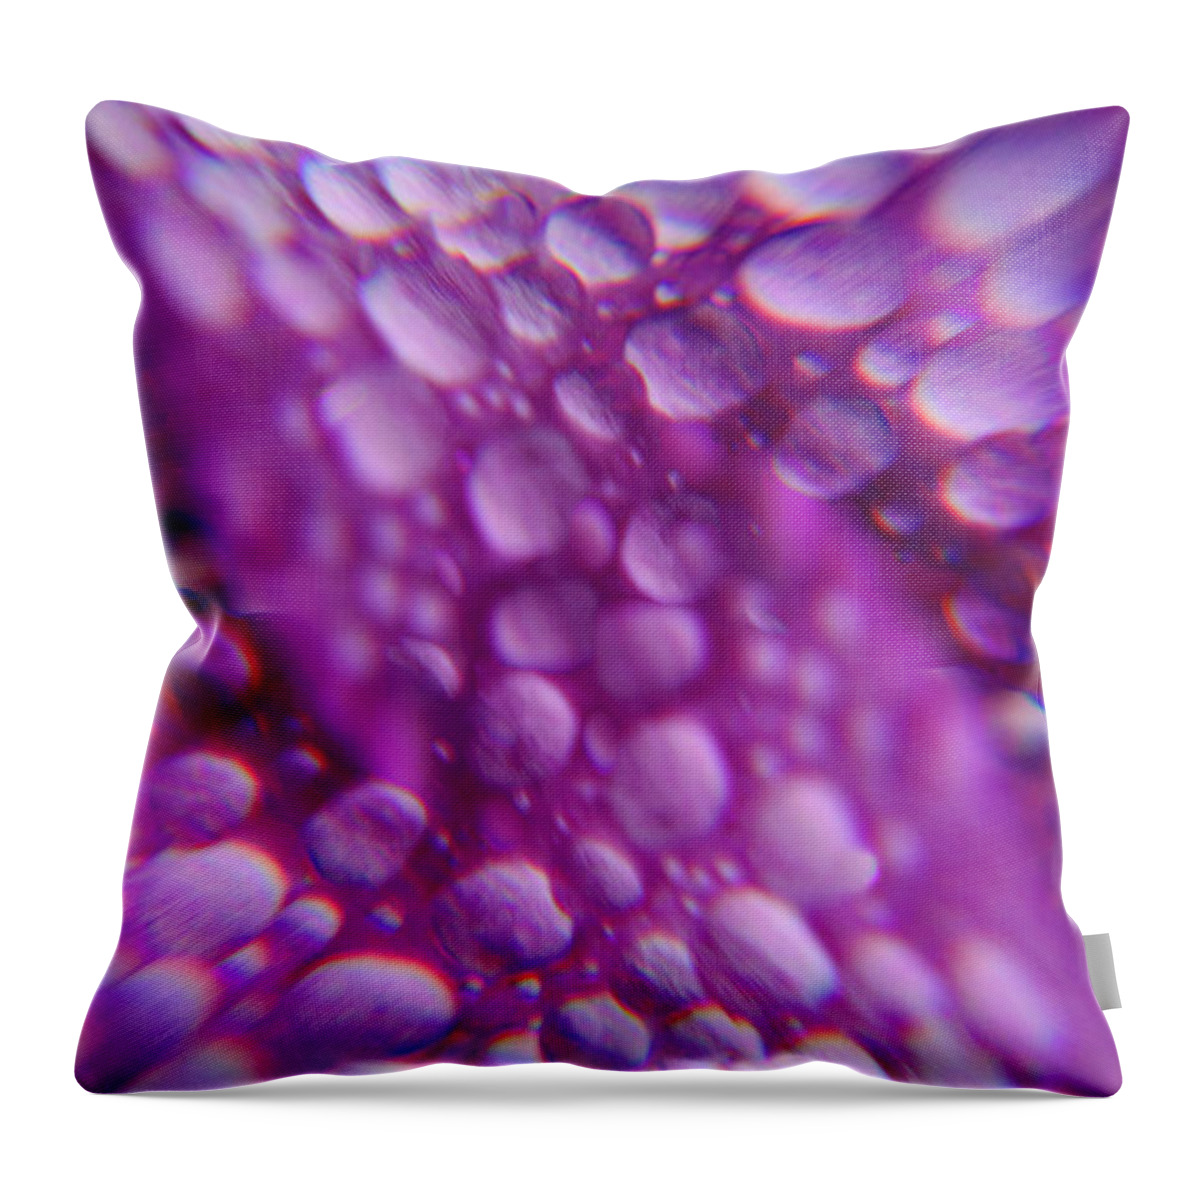 Flower Throw Pillow featuring the photograph Petals And Raindrops Abstract by Jeff Townsend